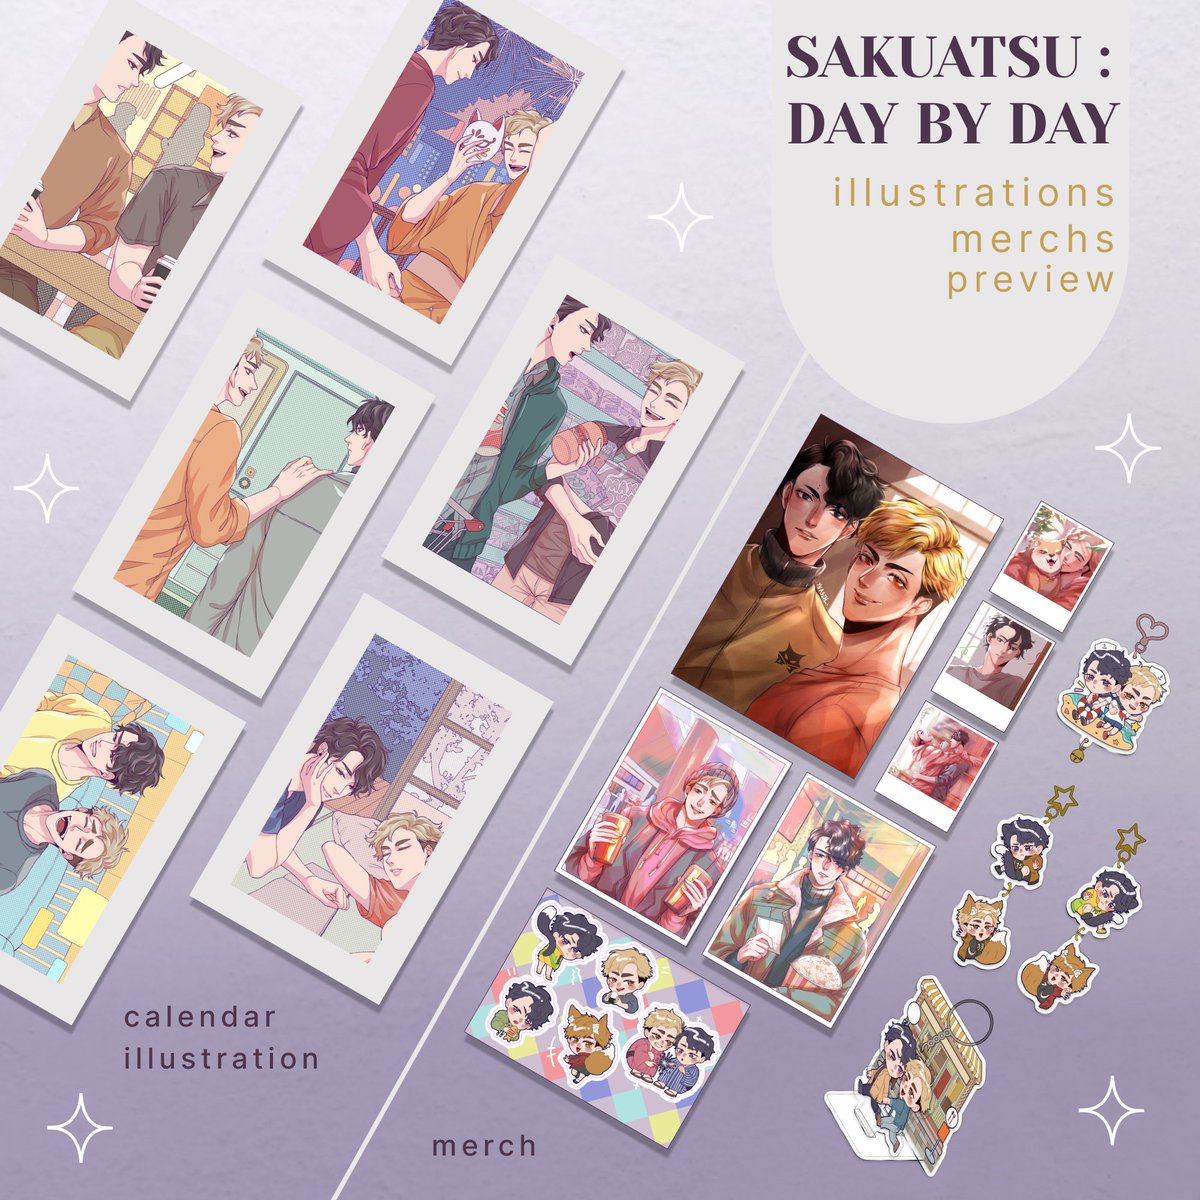 [RT appreaciated❤️🥰]

✨SAKUATSU : DAY BY DAY love package✨
"where the days feel hazier without you in it"

• SKTS Calendar  - 14 Illustrations
• 🇮🇩 based
• Group Order are very welcomed, DM me if you are interested :) 

Link in thread
#SakuAtsu #MiyaAtsumu #SakusaKiyoomi 